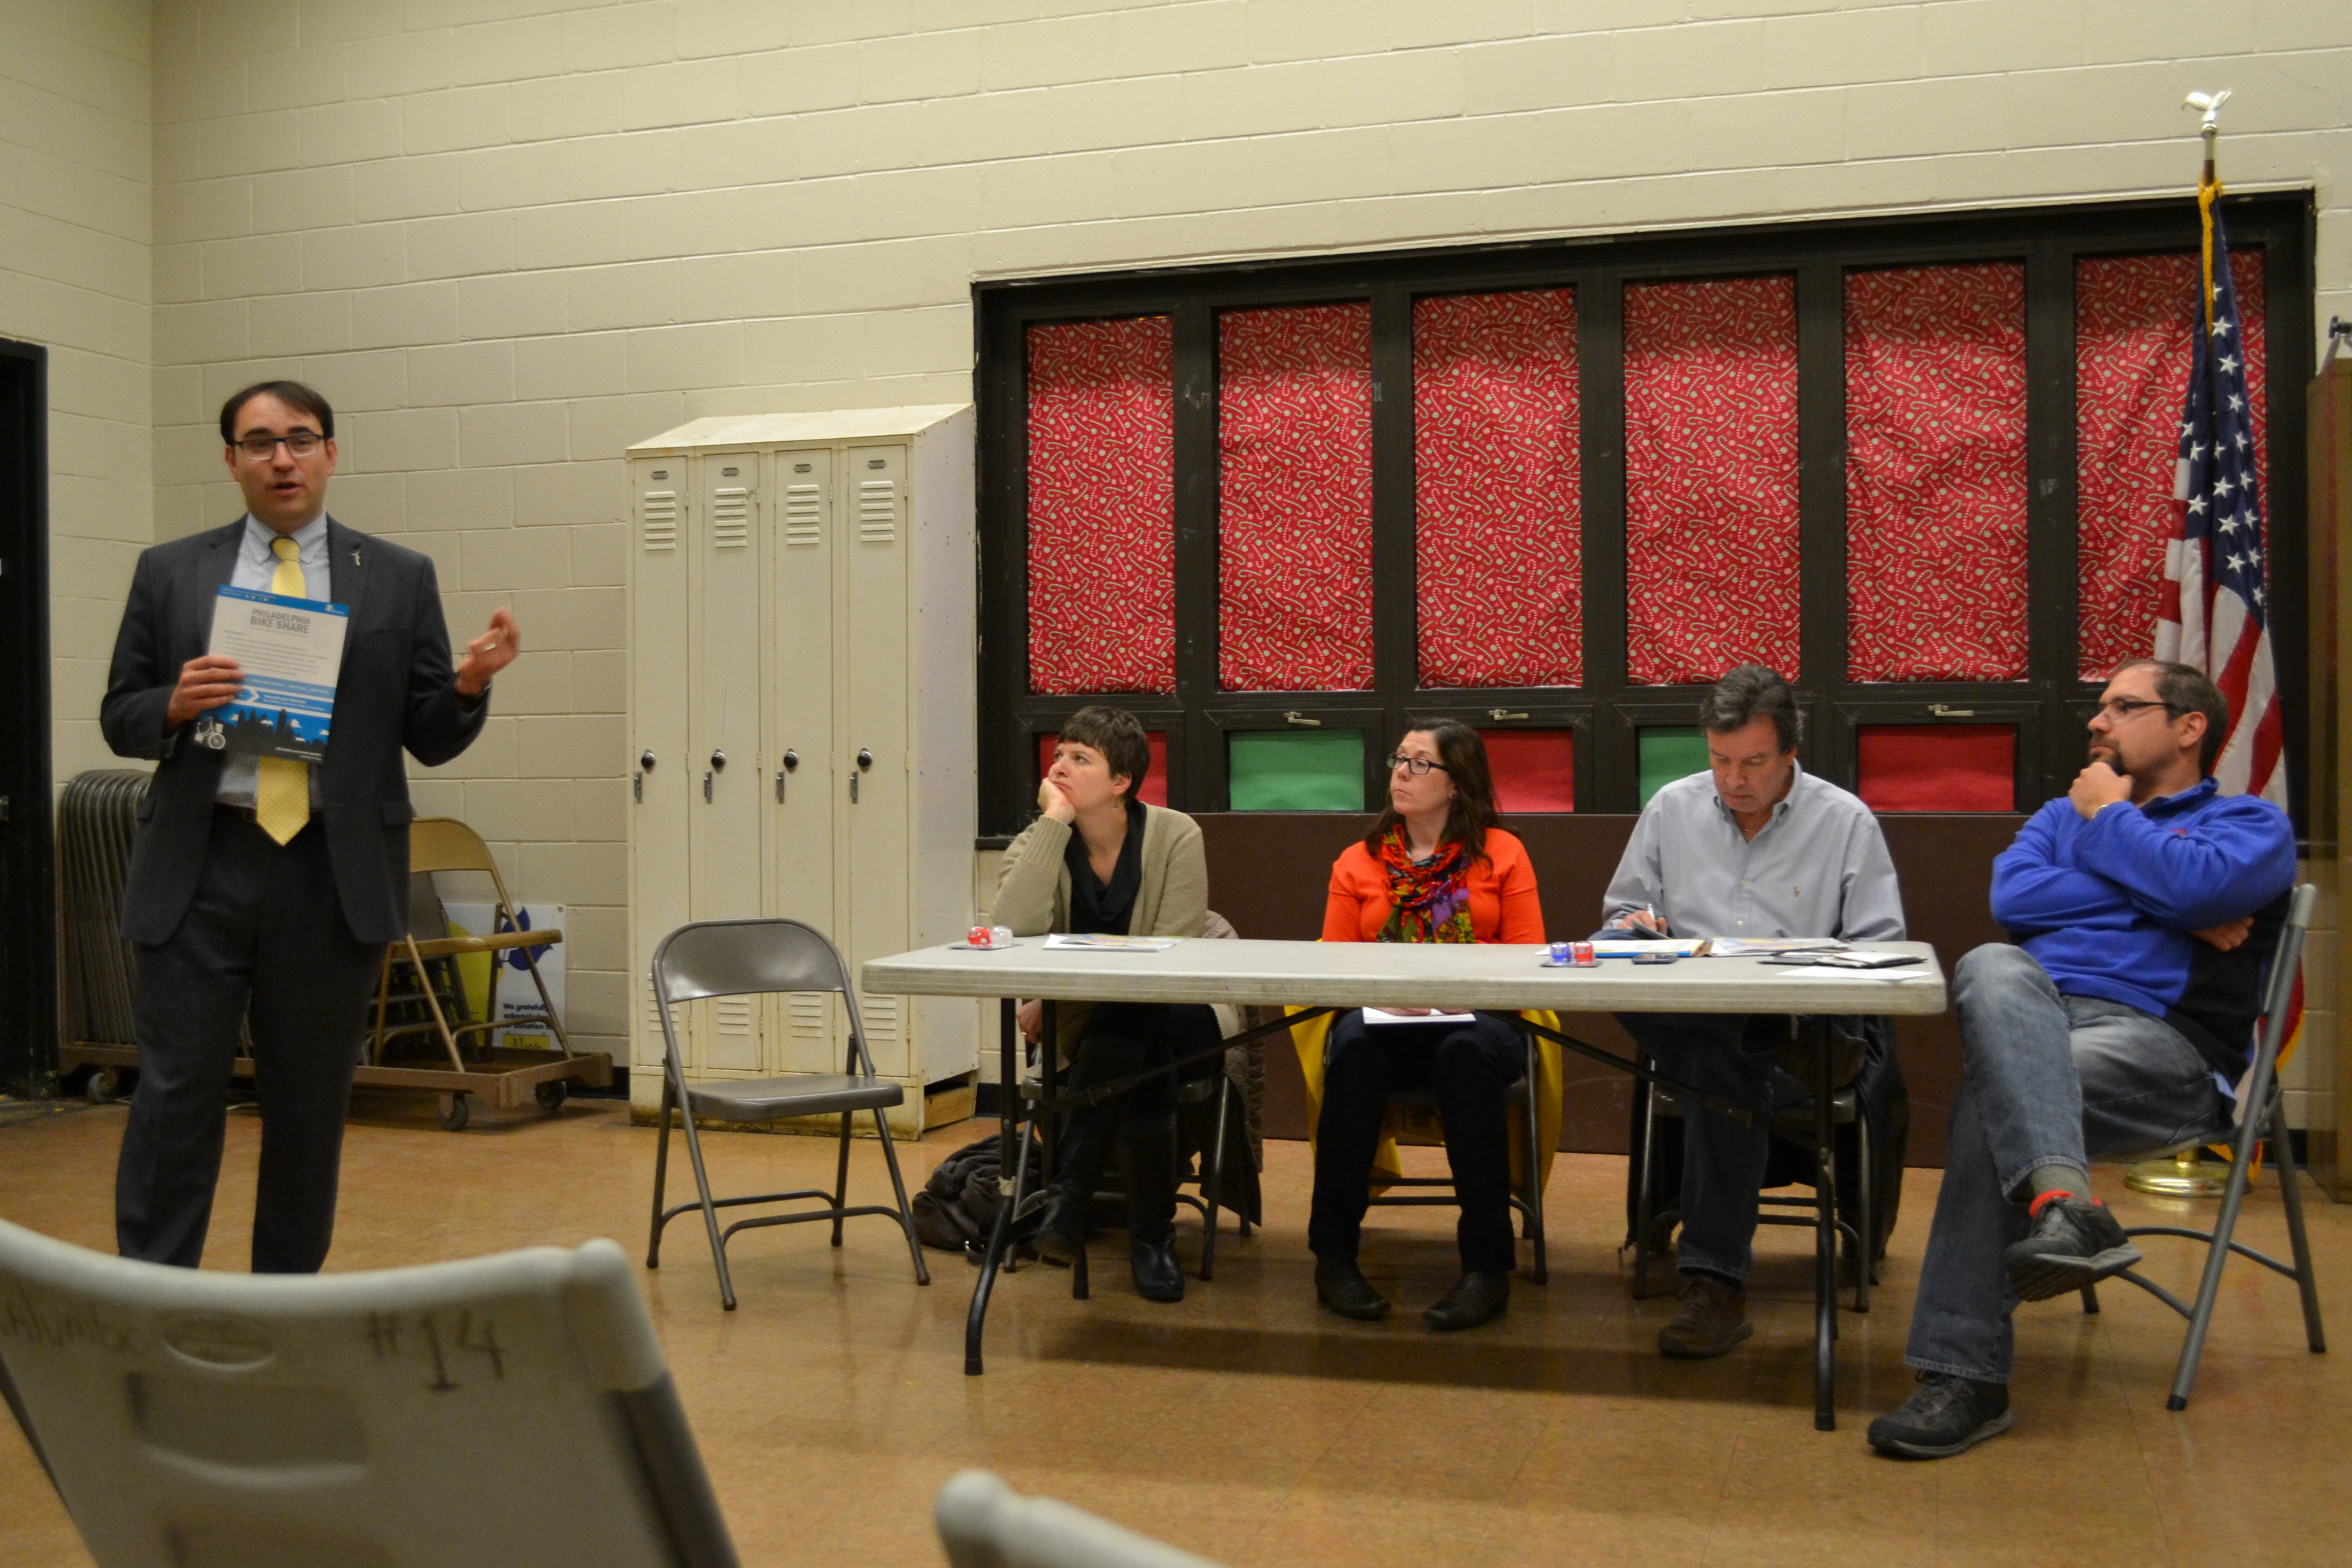 Andrew Stober, MOTU chief of staff, answered bike share questions at the Queen Village, Bella Vista meeting